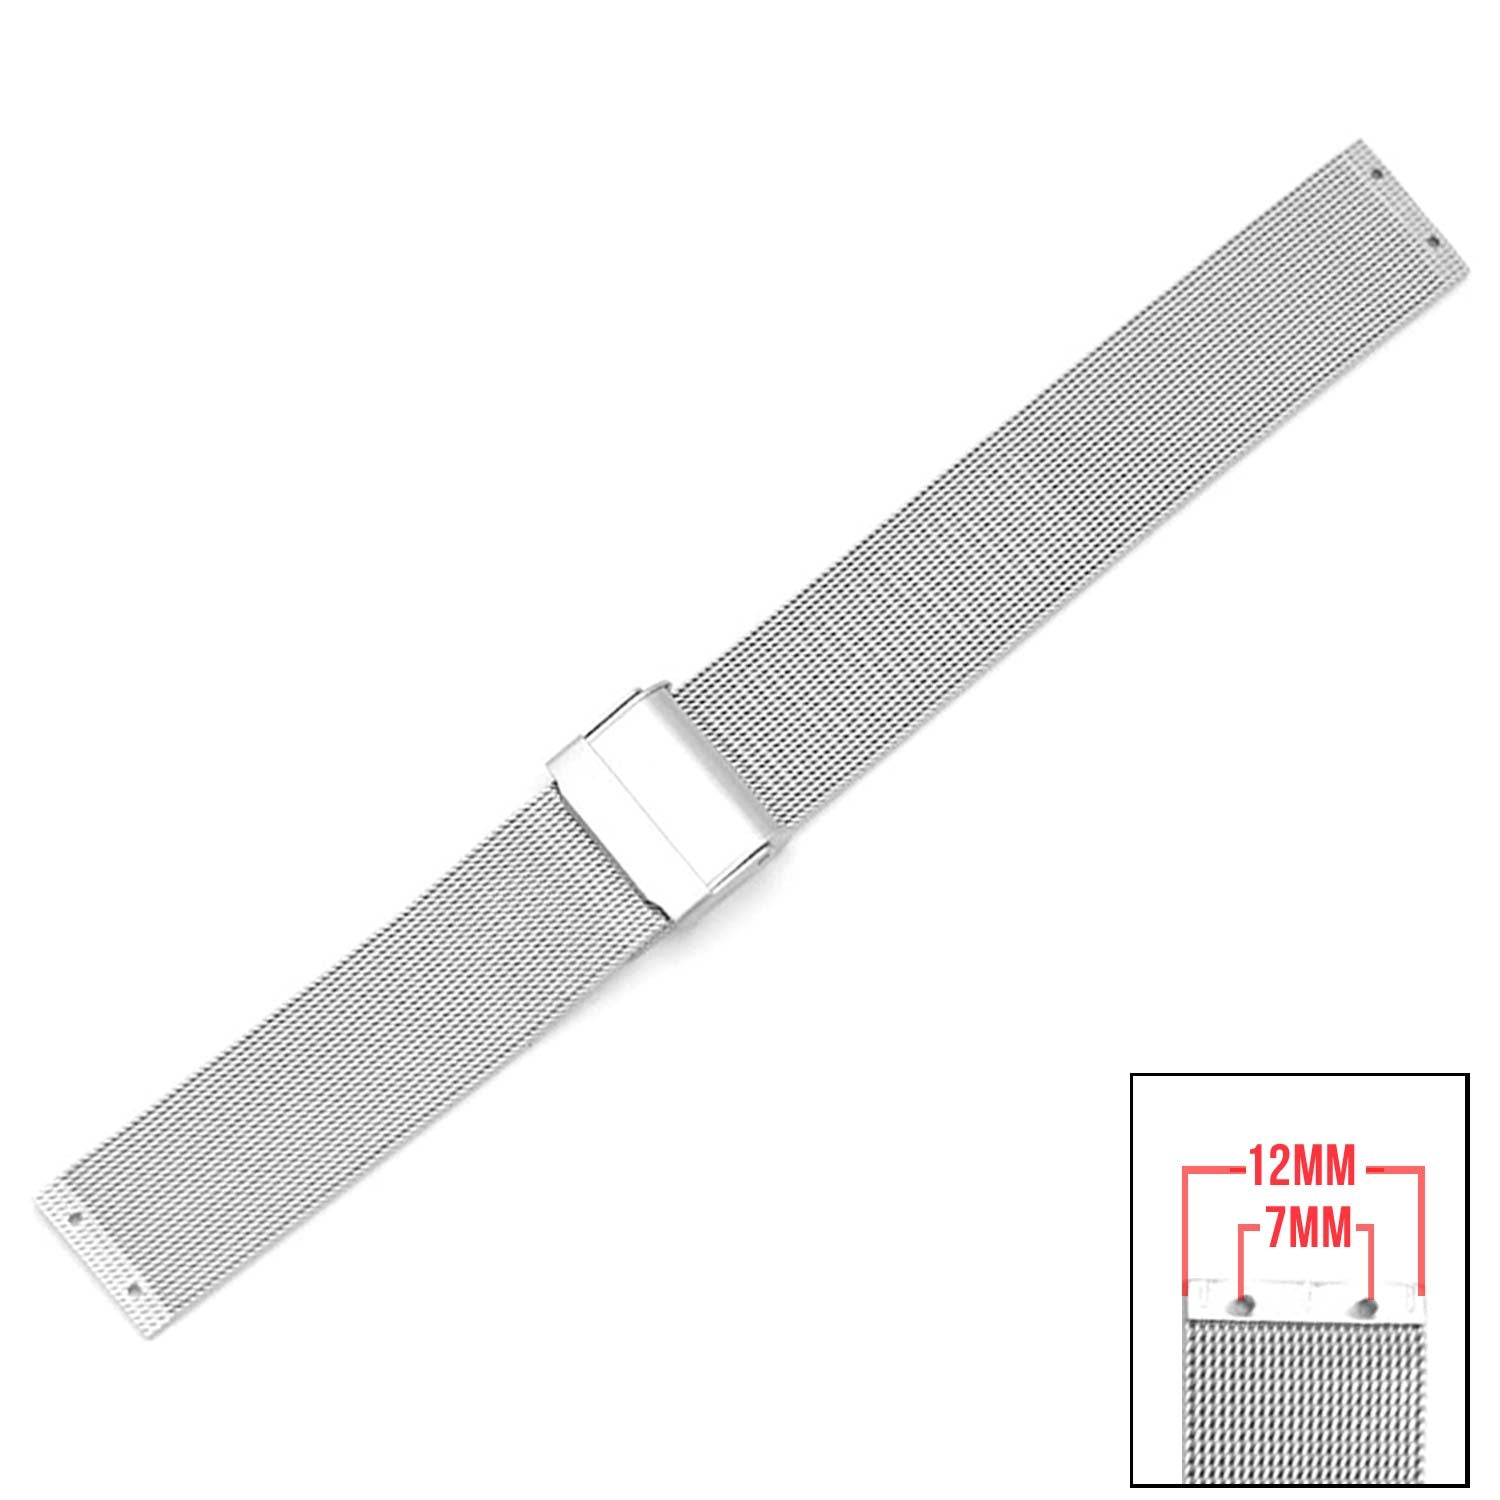 Screwing Stainless Steel Metal Mesh Replacement Band for Skagen Watches